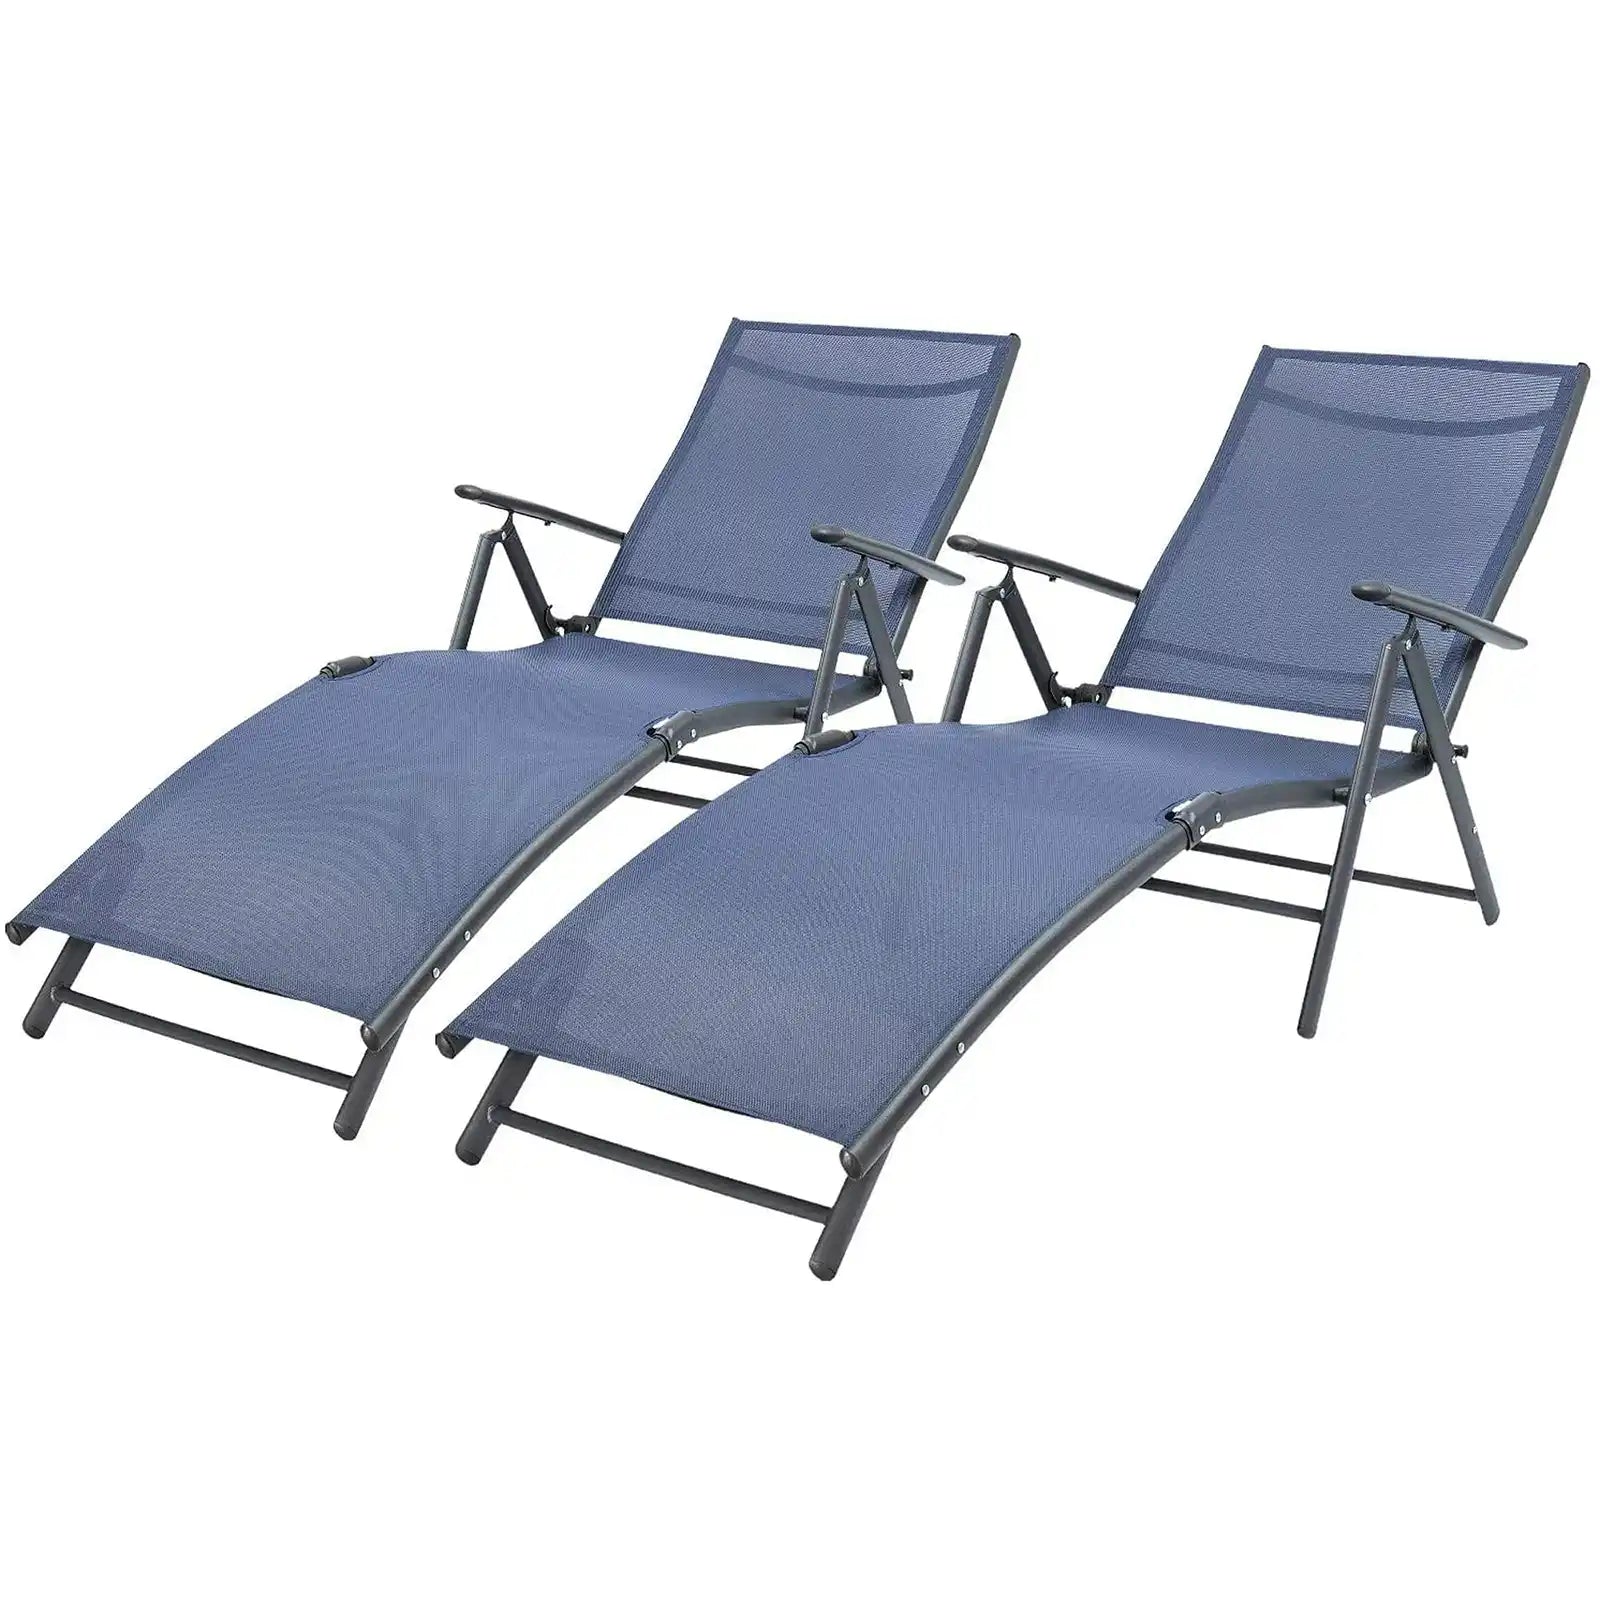 Patio Adjustable Chaise Lounge for Outdoor and Pool Side, Folding Recliners, Set of 2